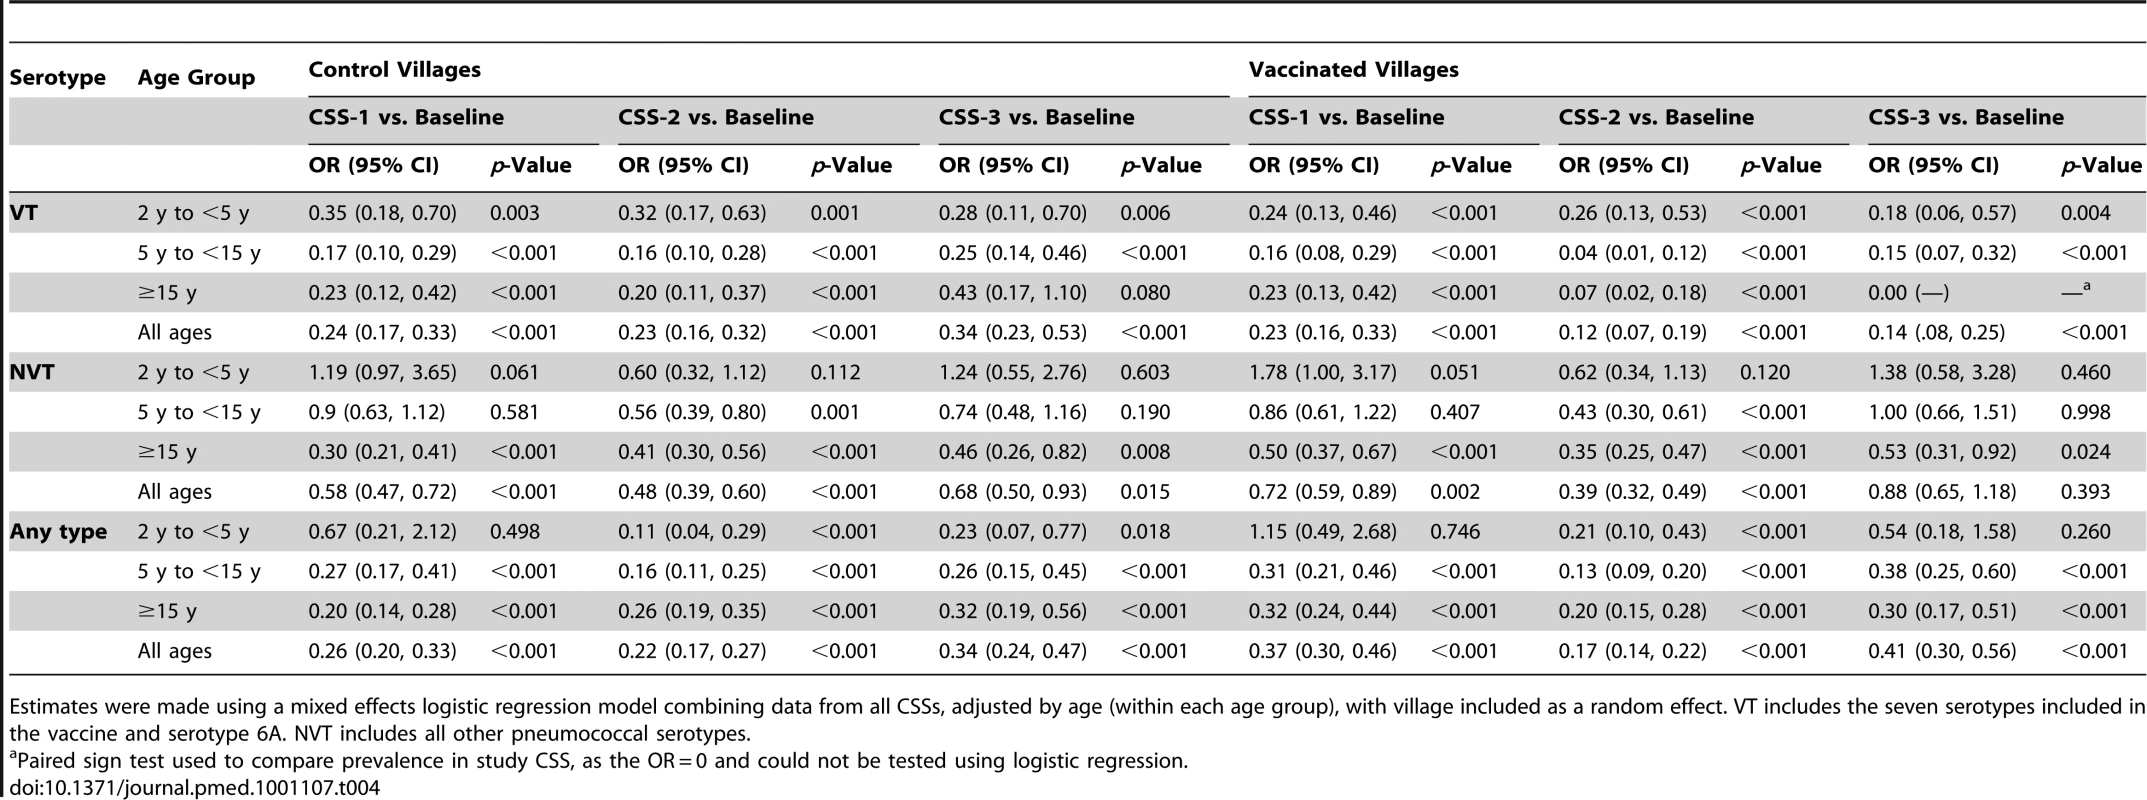 Comparison of the prevalence of pneumococcal nasopharyngeal carriage of VT serotypes, NVT serotypes, and any pneumococcal serotype between pre-vaccination CSS and each of the post-vaccination CSSs in vaccinated and control villages.